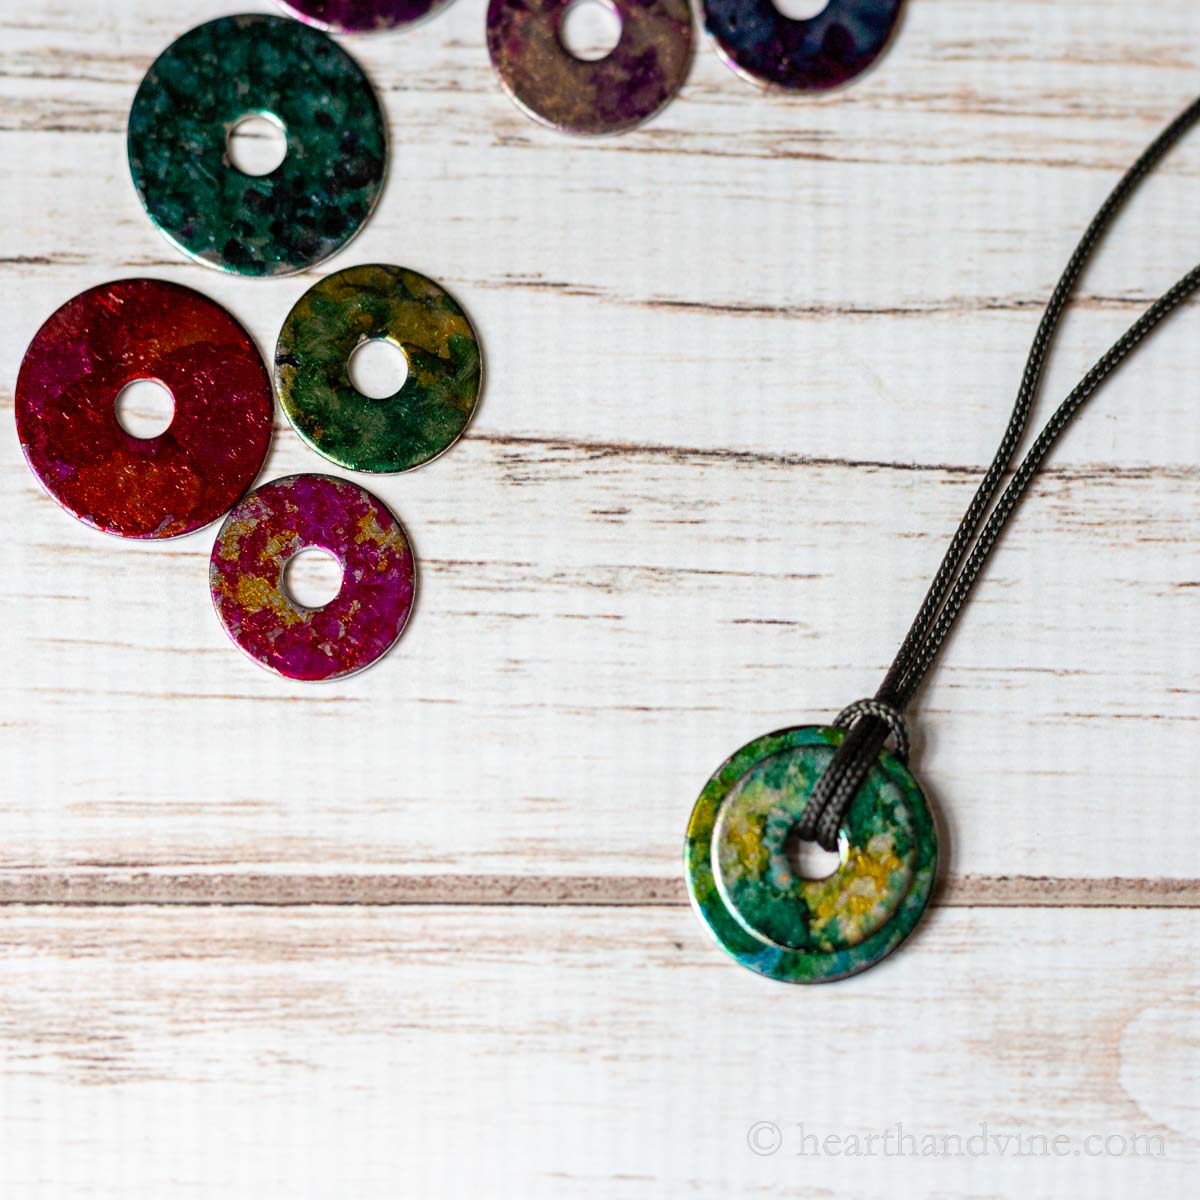 Alcohol in washer necklace next to a few decorated washers with alcohol inks.